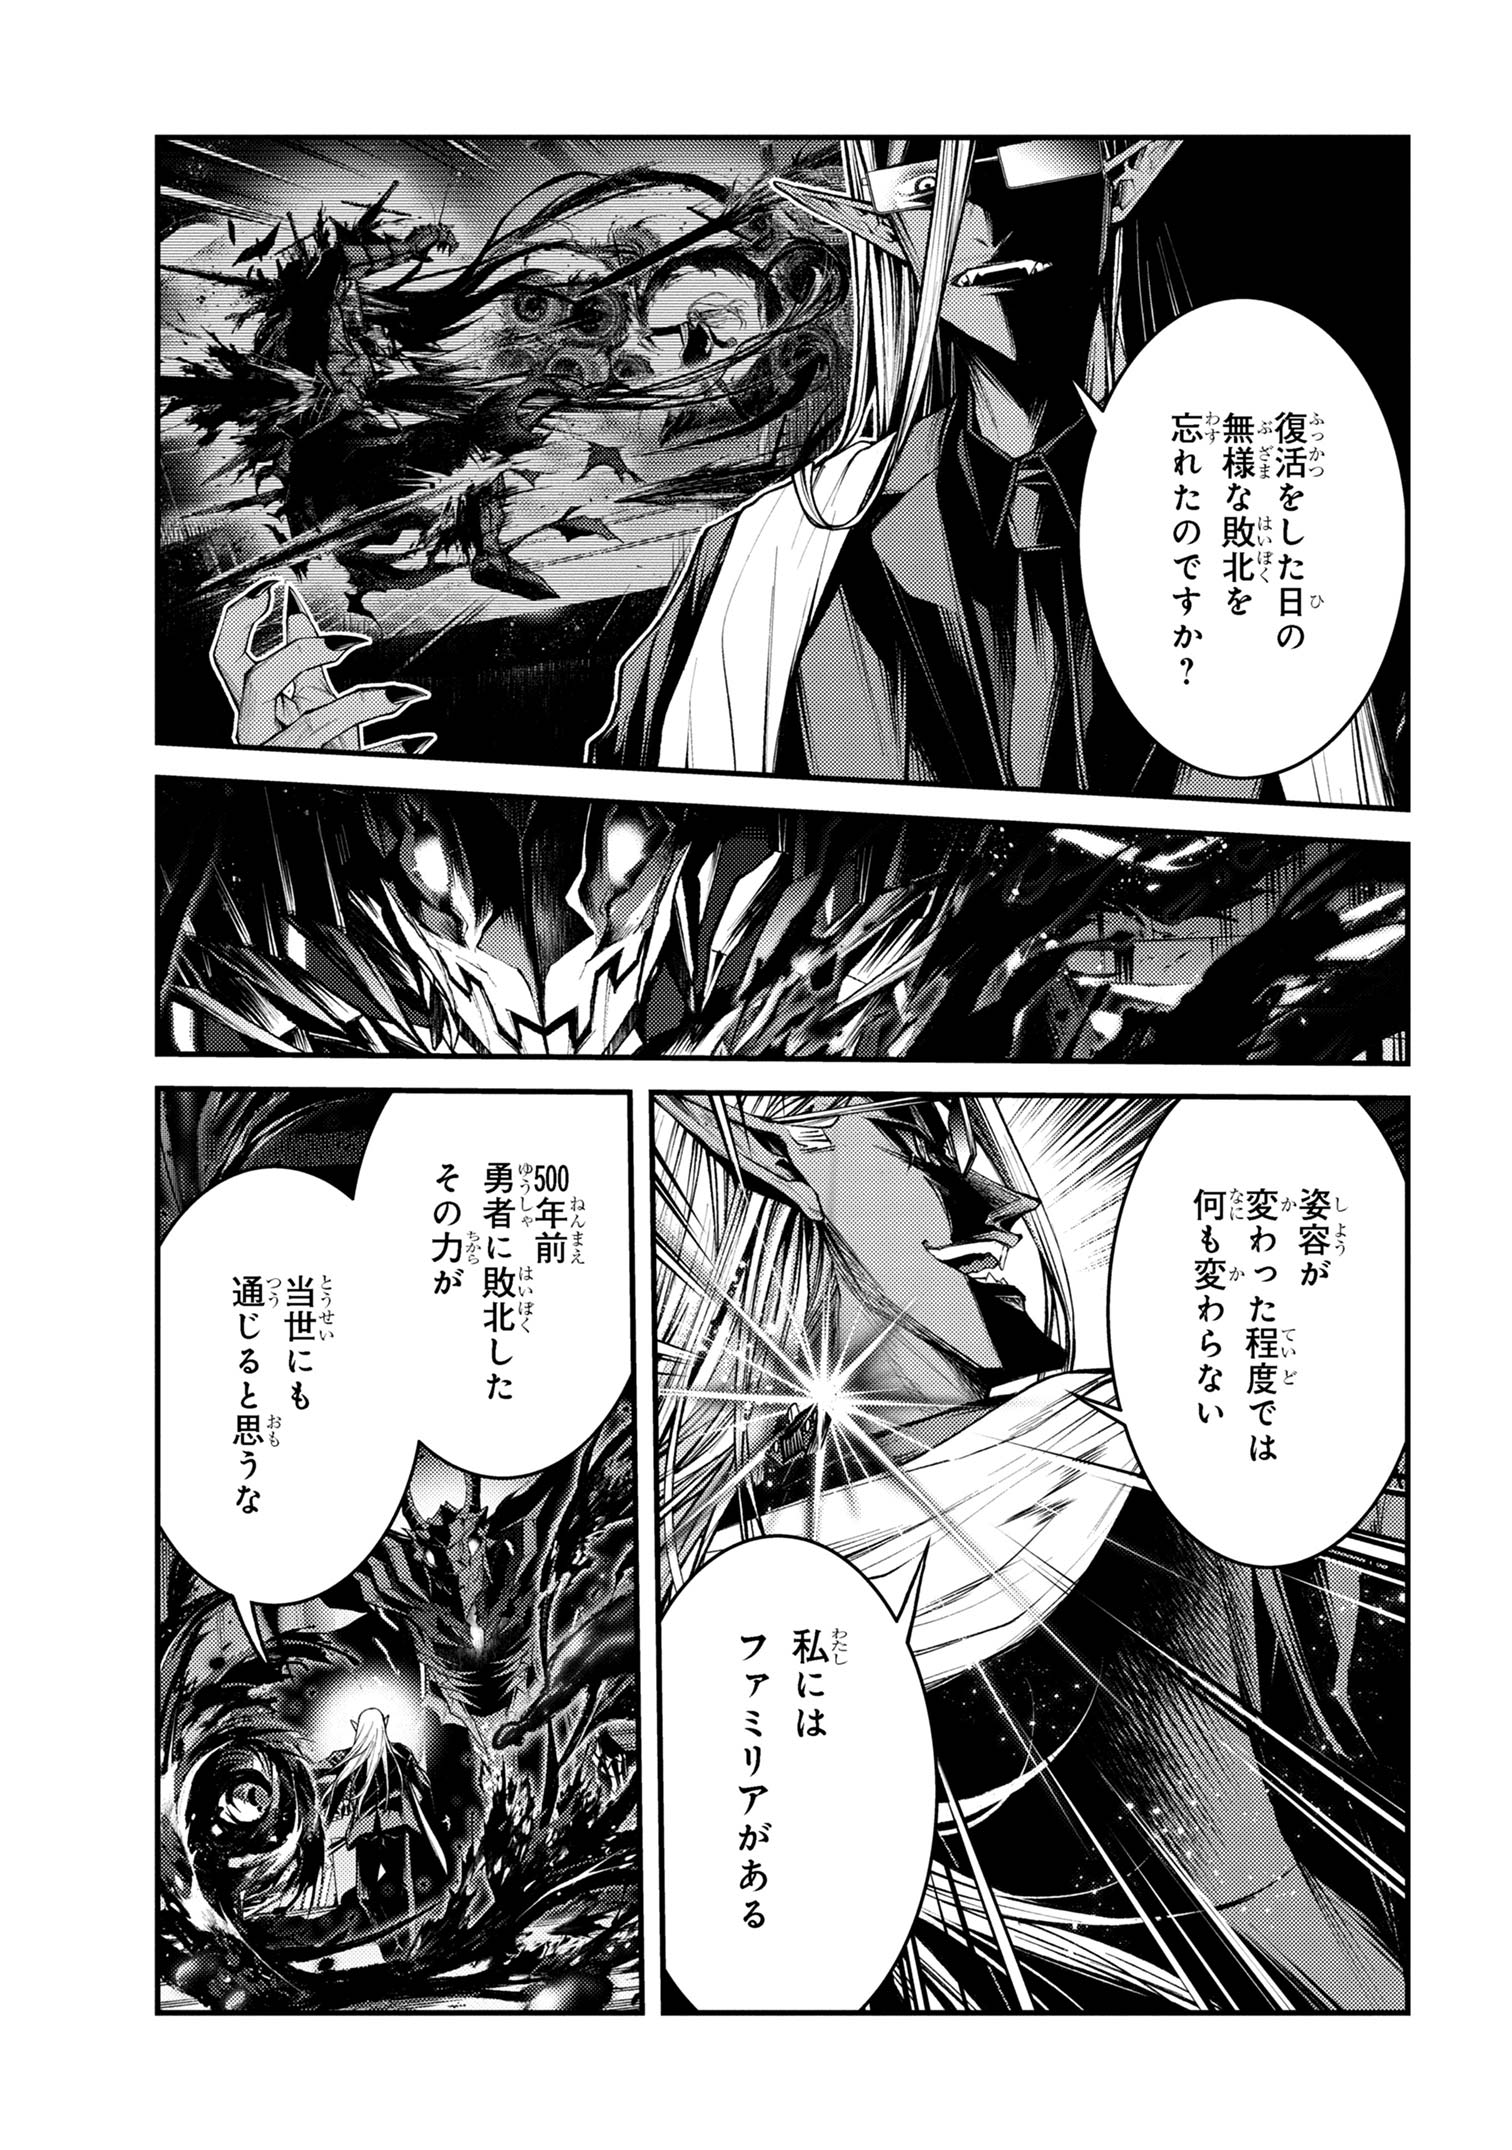 Maou 2099 - Chapter 14.1 - Page 5